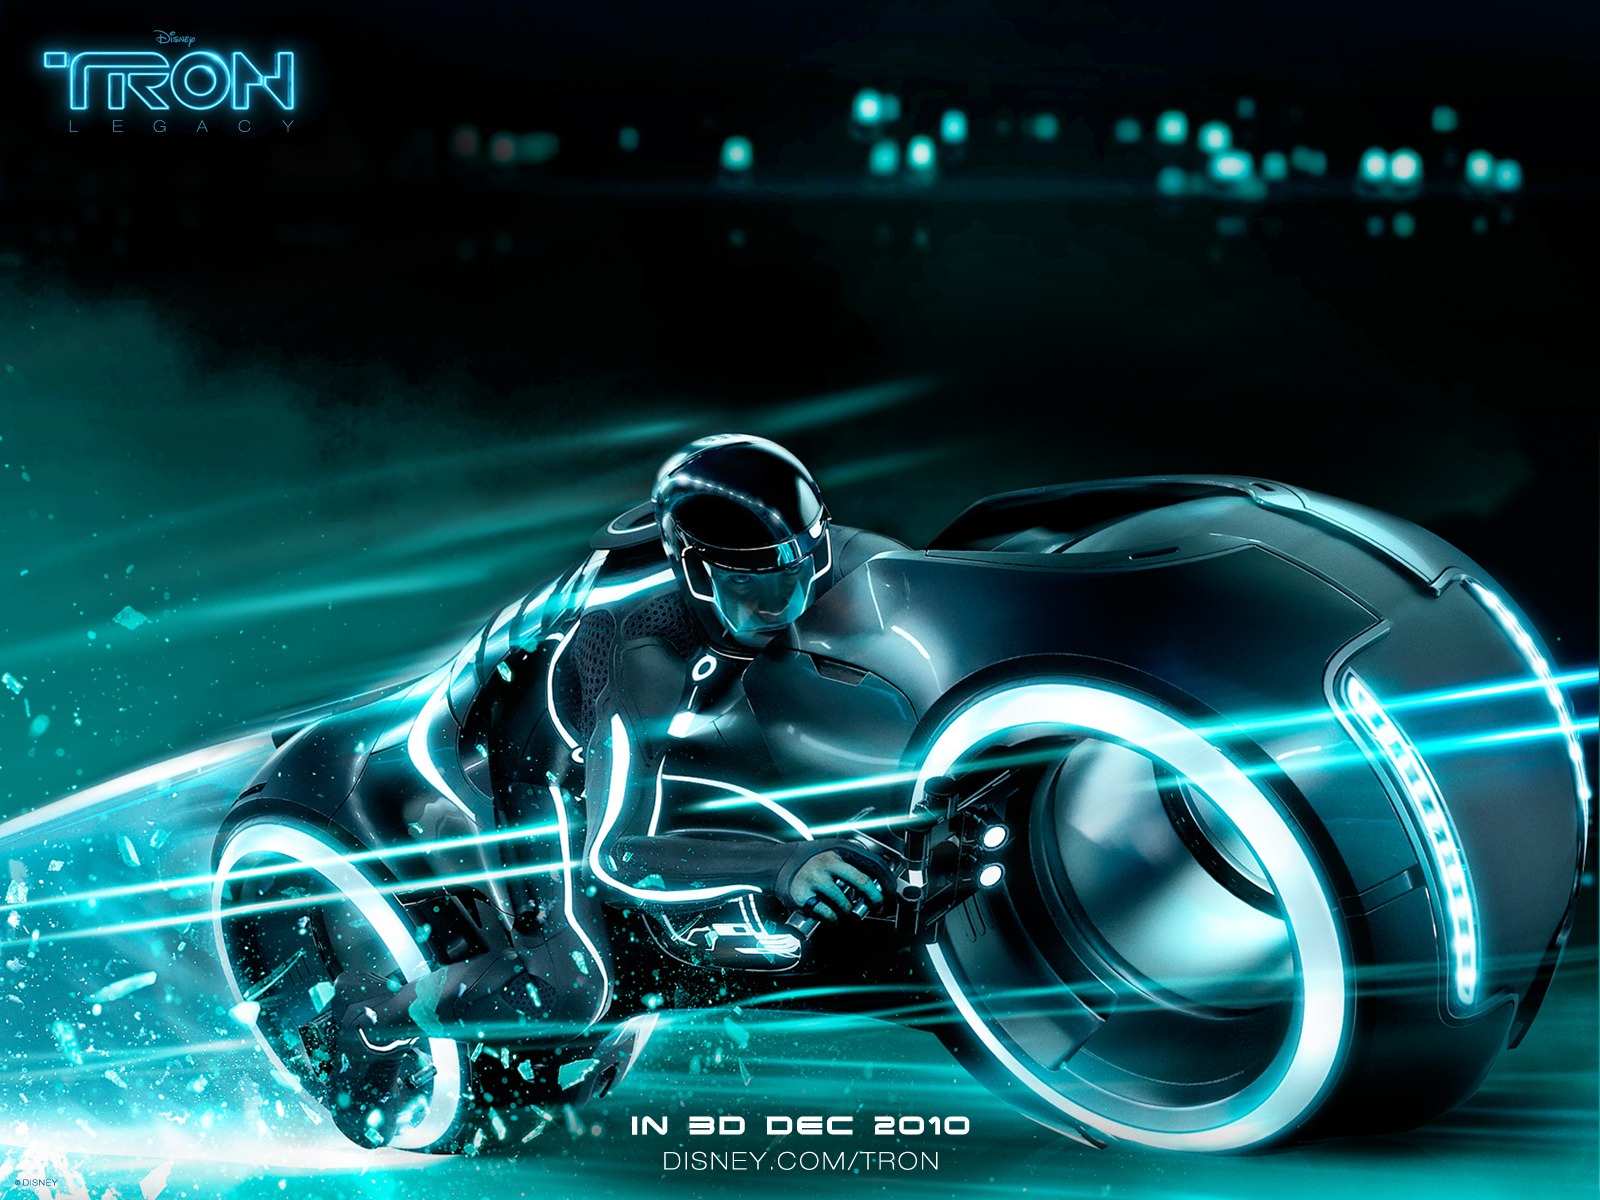 Tron Legacy 3D Wallpapers HD Wallpapers 1600x1200